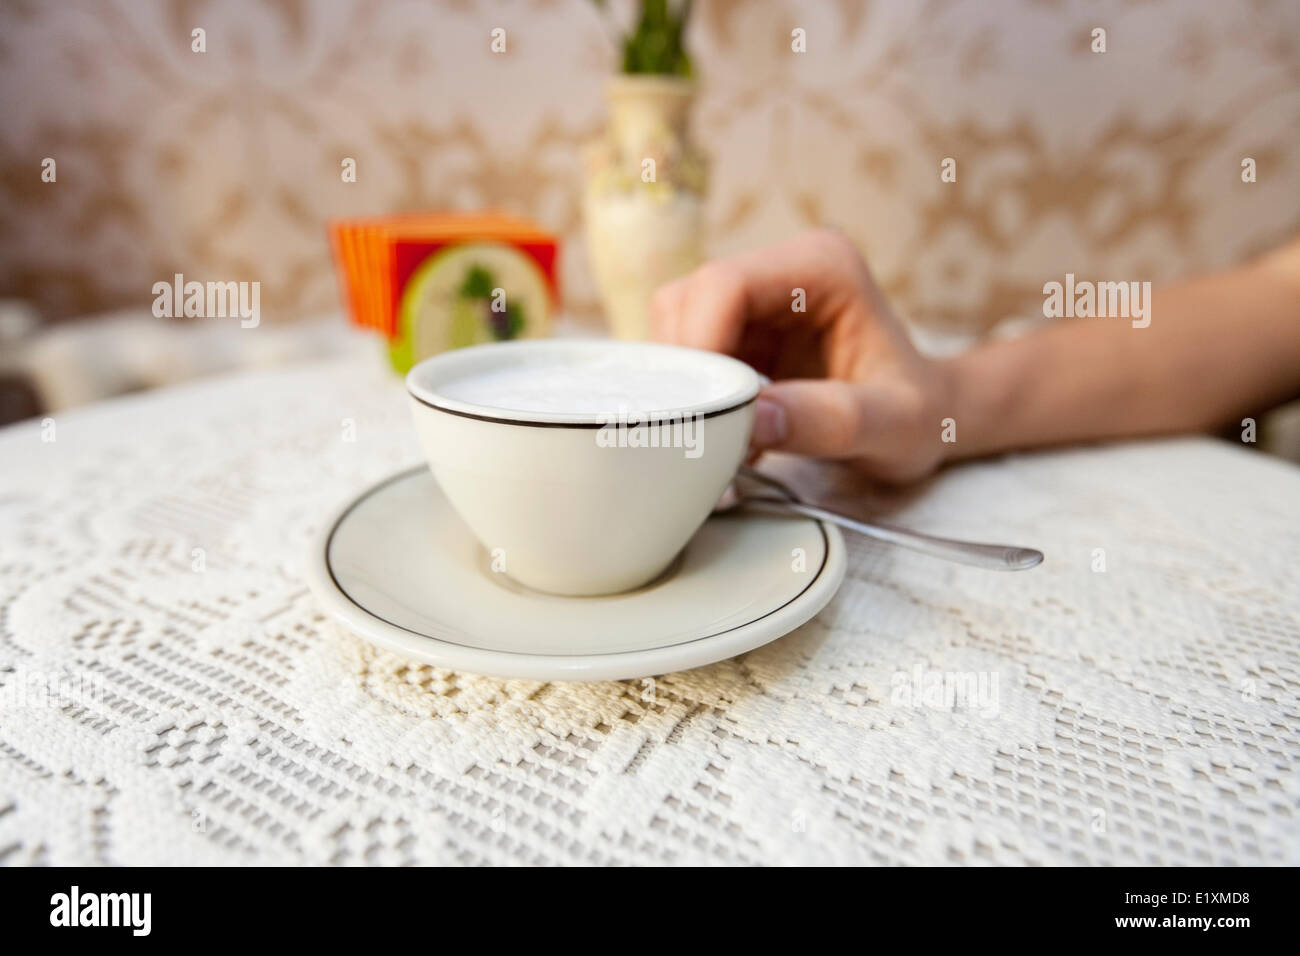 Cropped image of man having cup of coffee at table in cafe Stock Photo